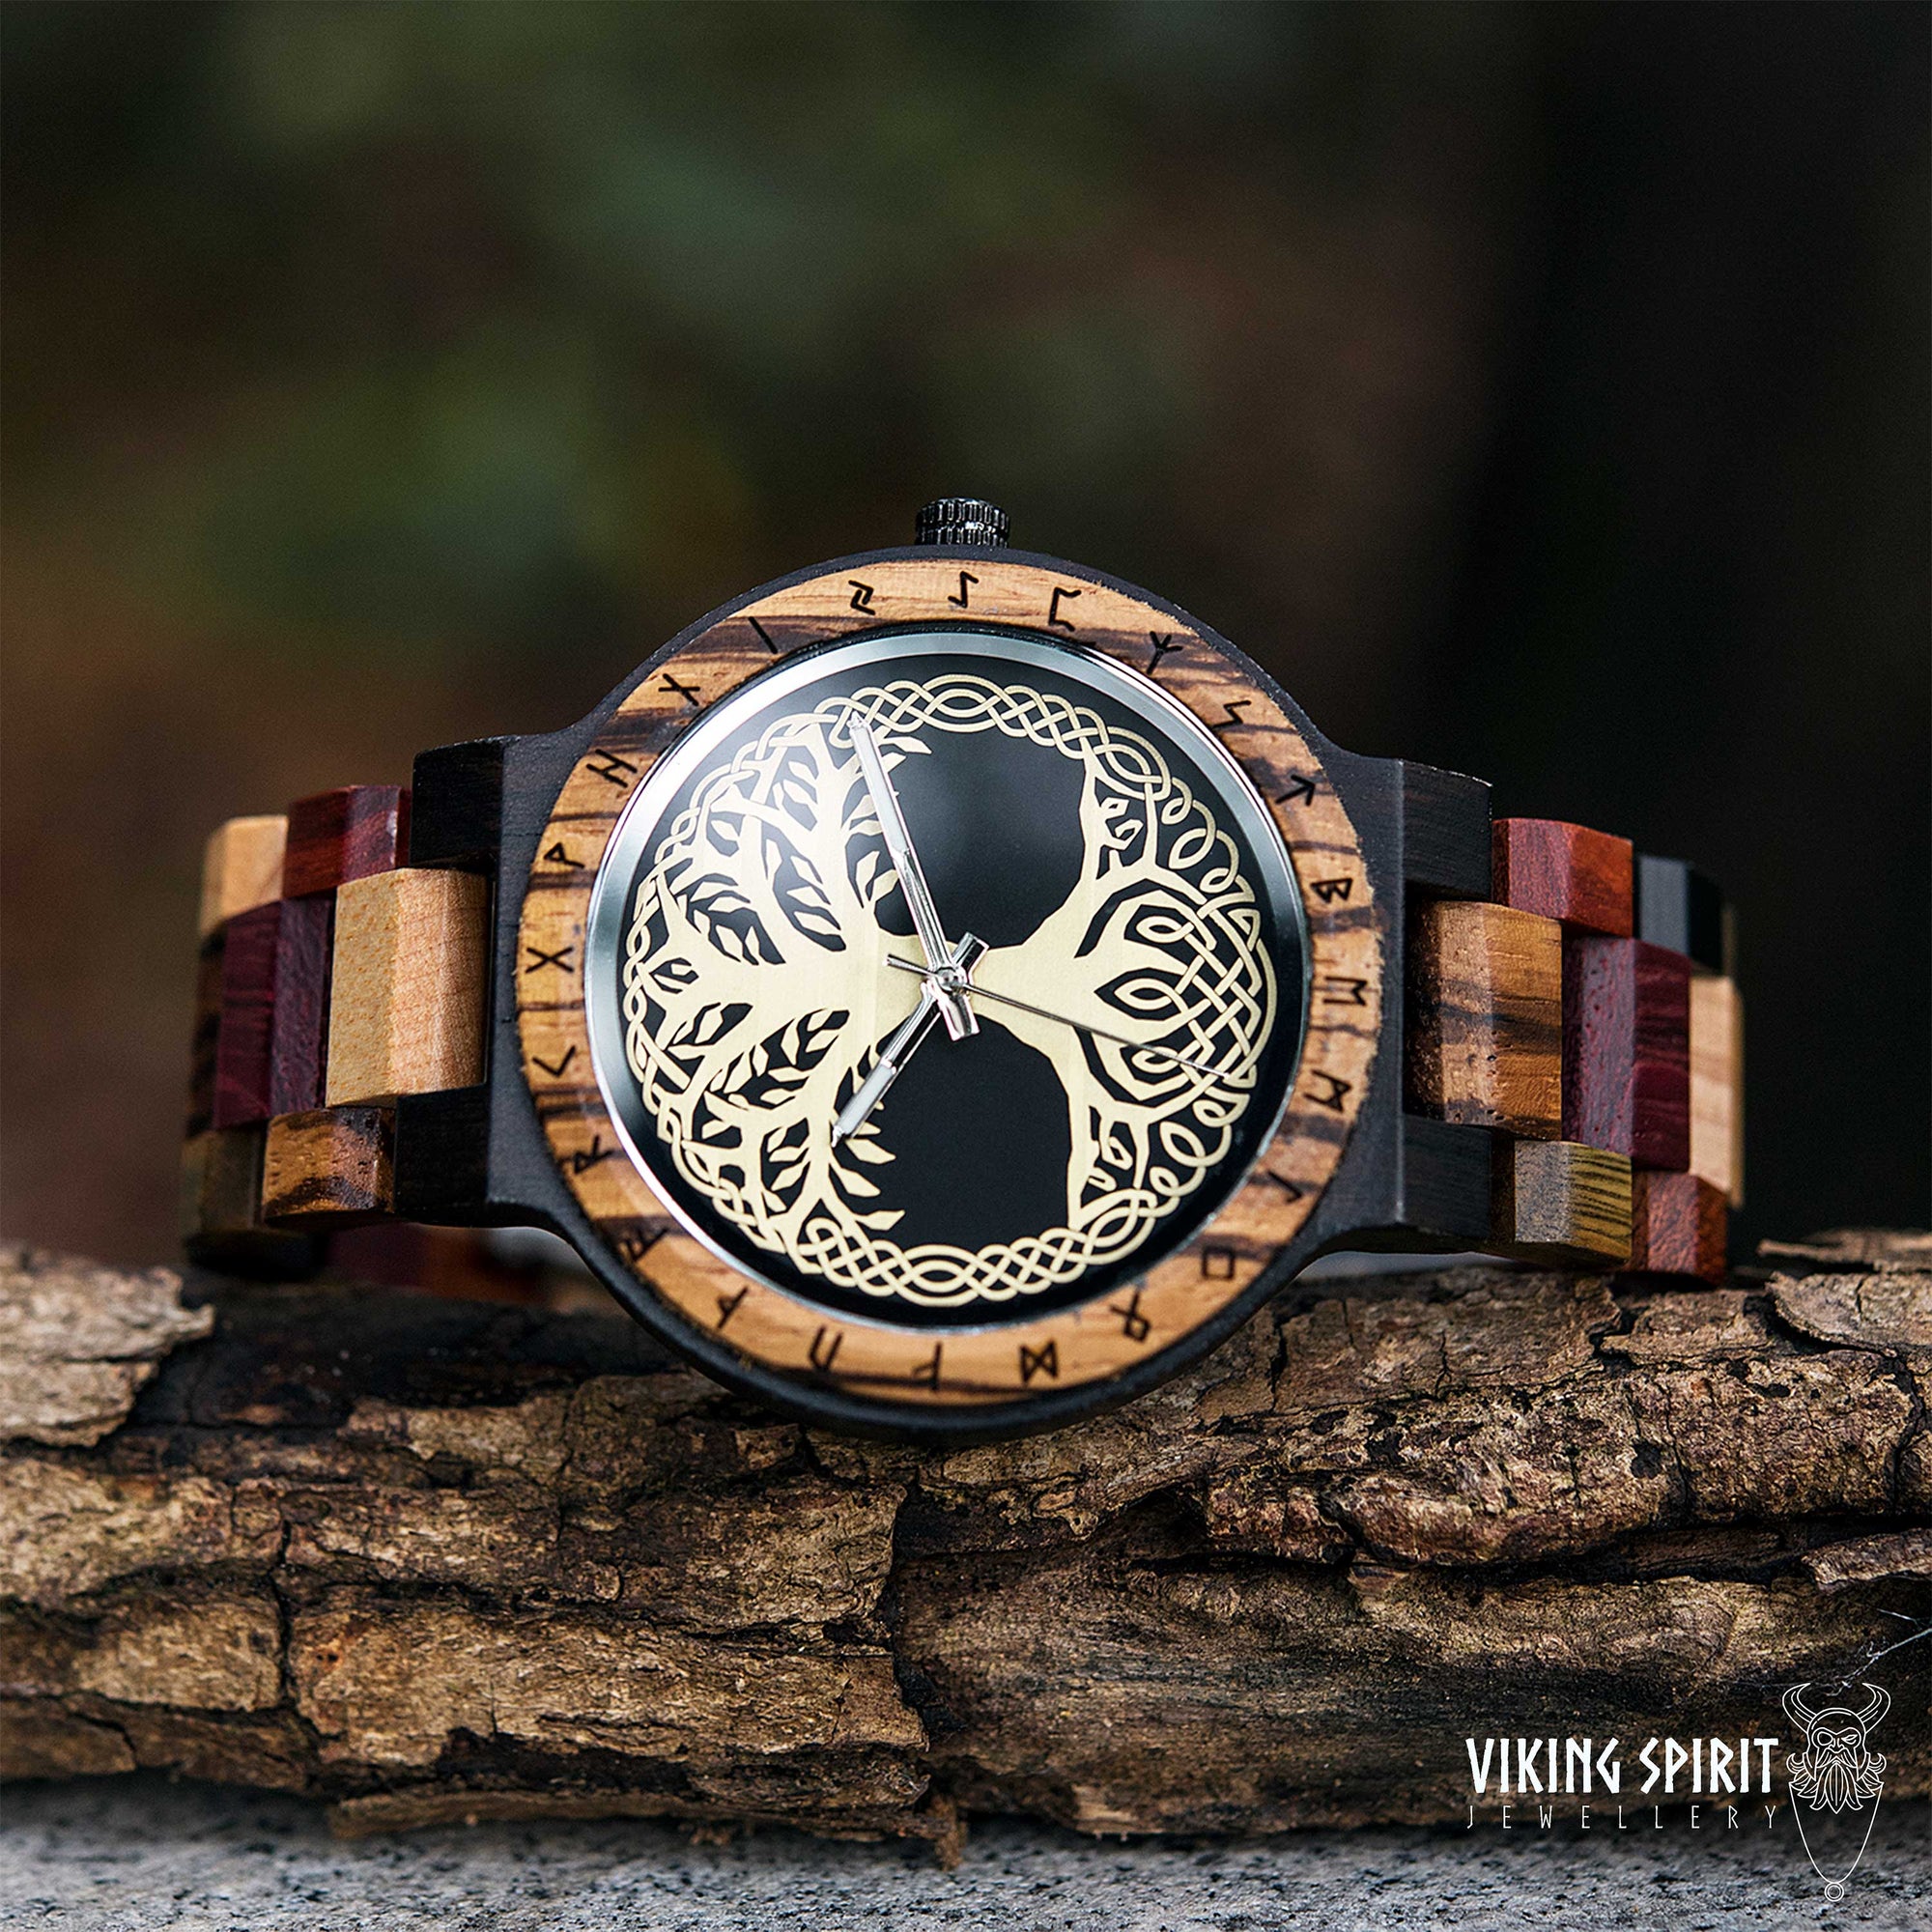 The Norse Tree of Life Watch